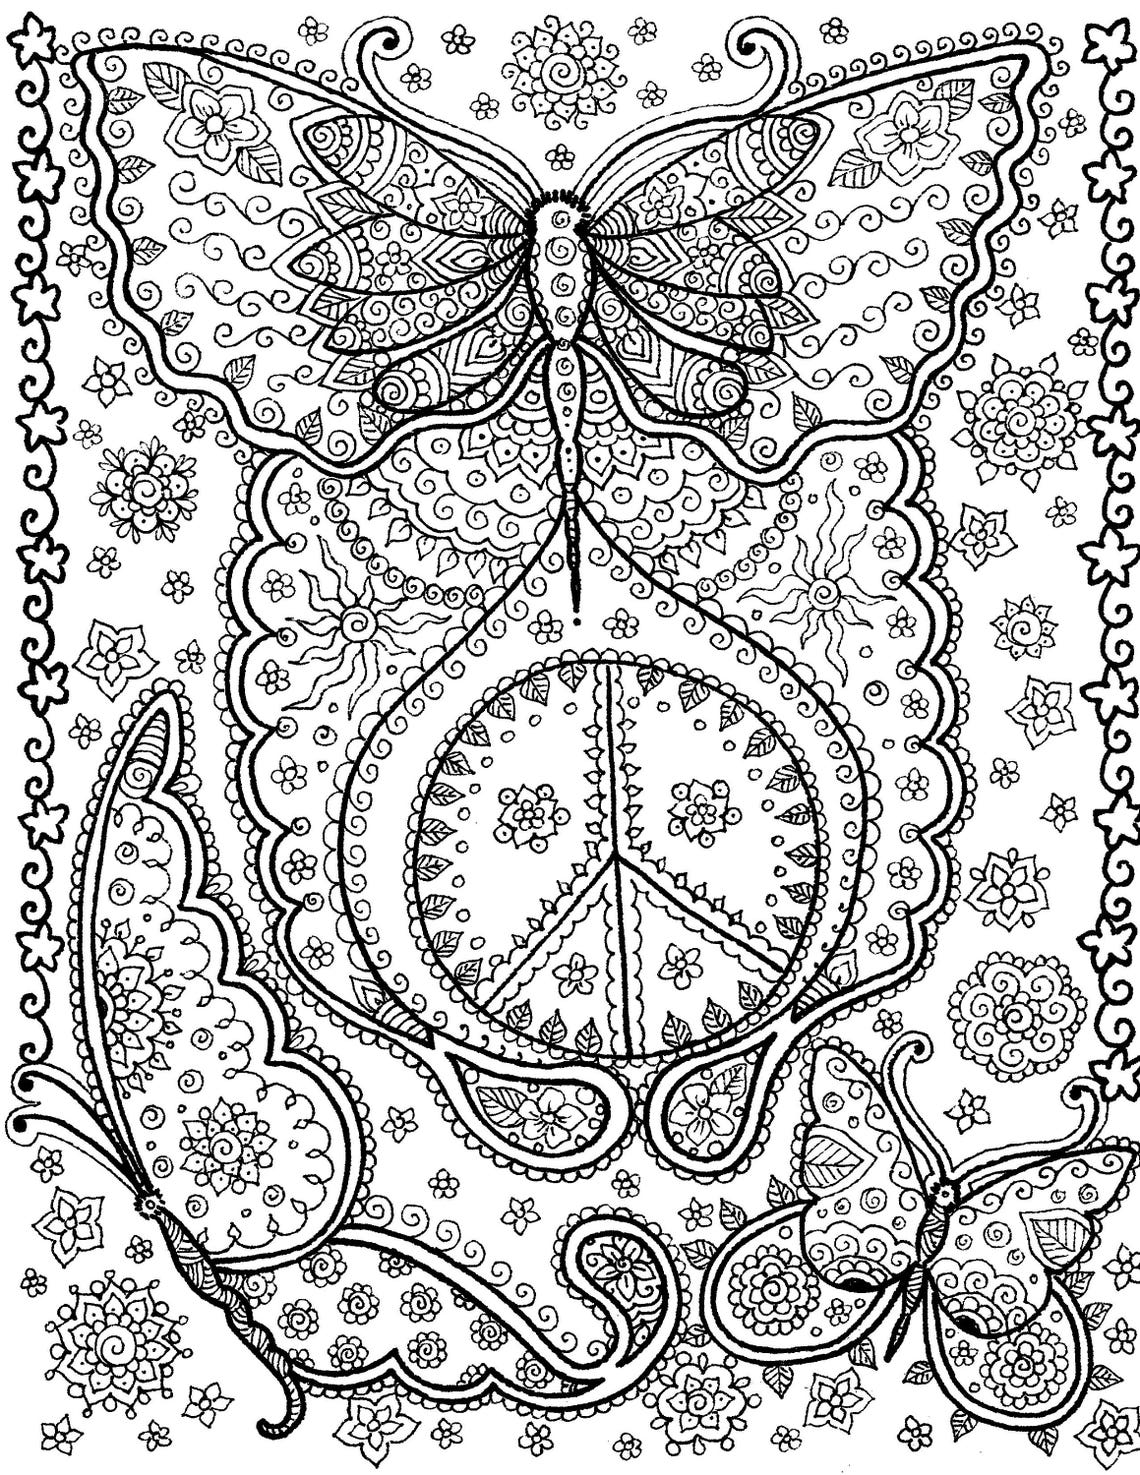 Peace 5 Pack Coloring Pages Digital Instant Download Peace | Etsy